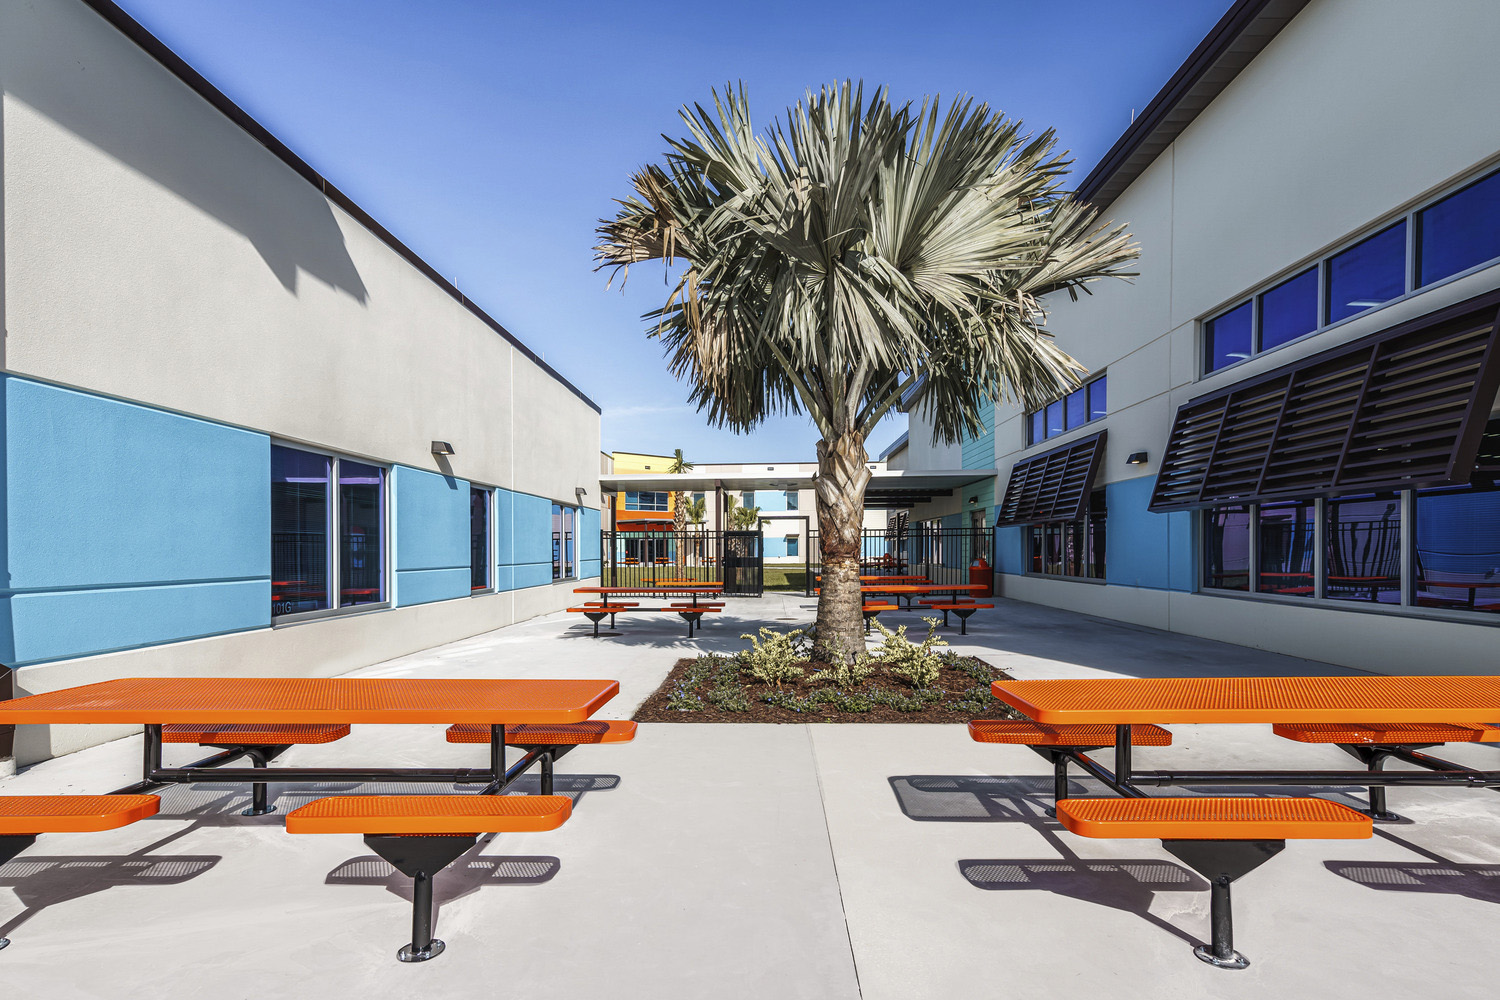 outdoor area between two buildings with palm tree and orange picnic tables